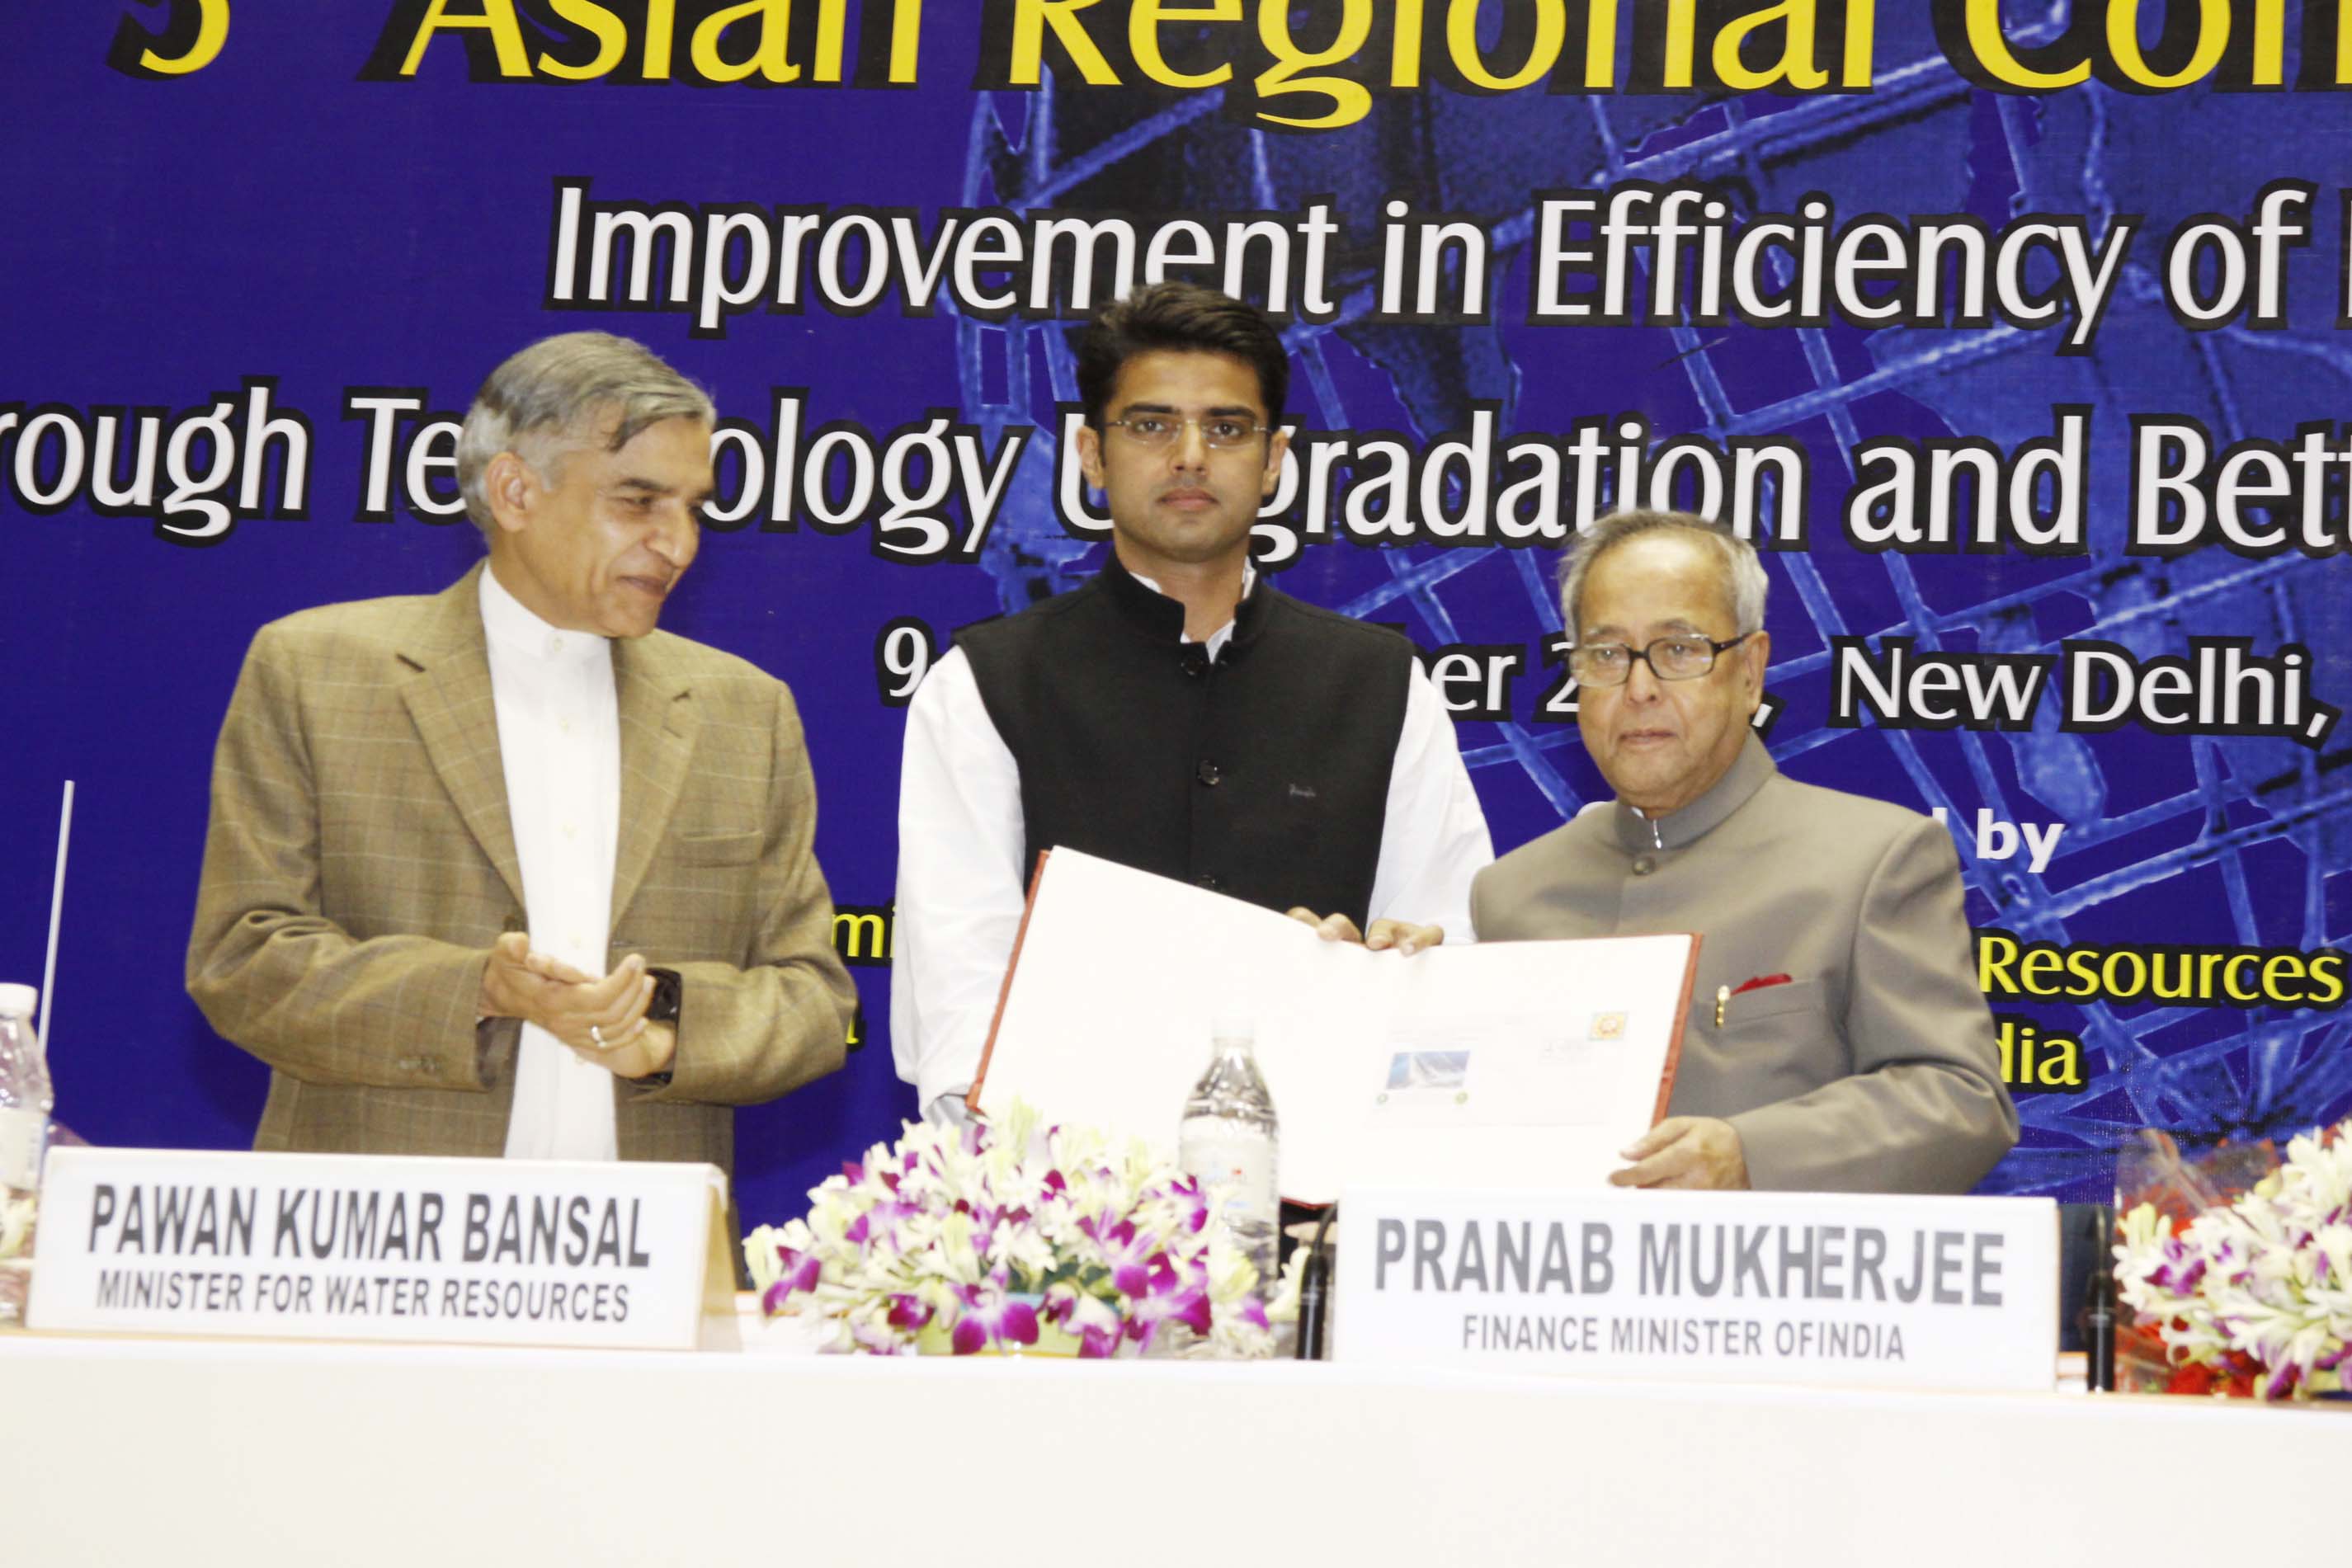 Postal stamp release during the 5th Asian Regional Conference, New Delhi, 2009